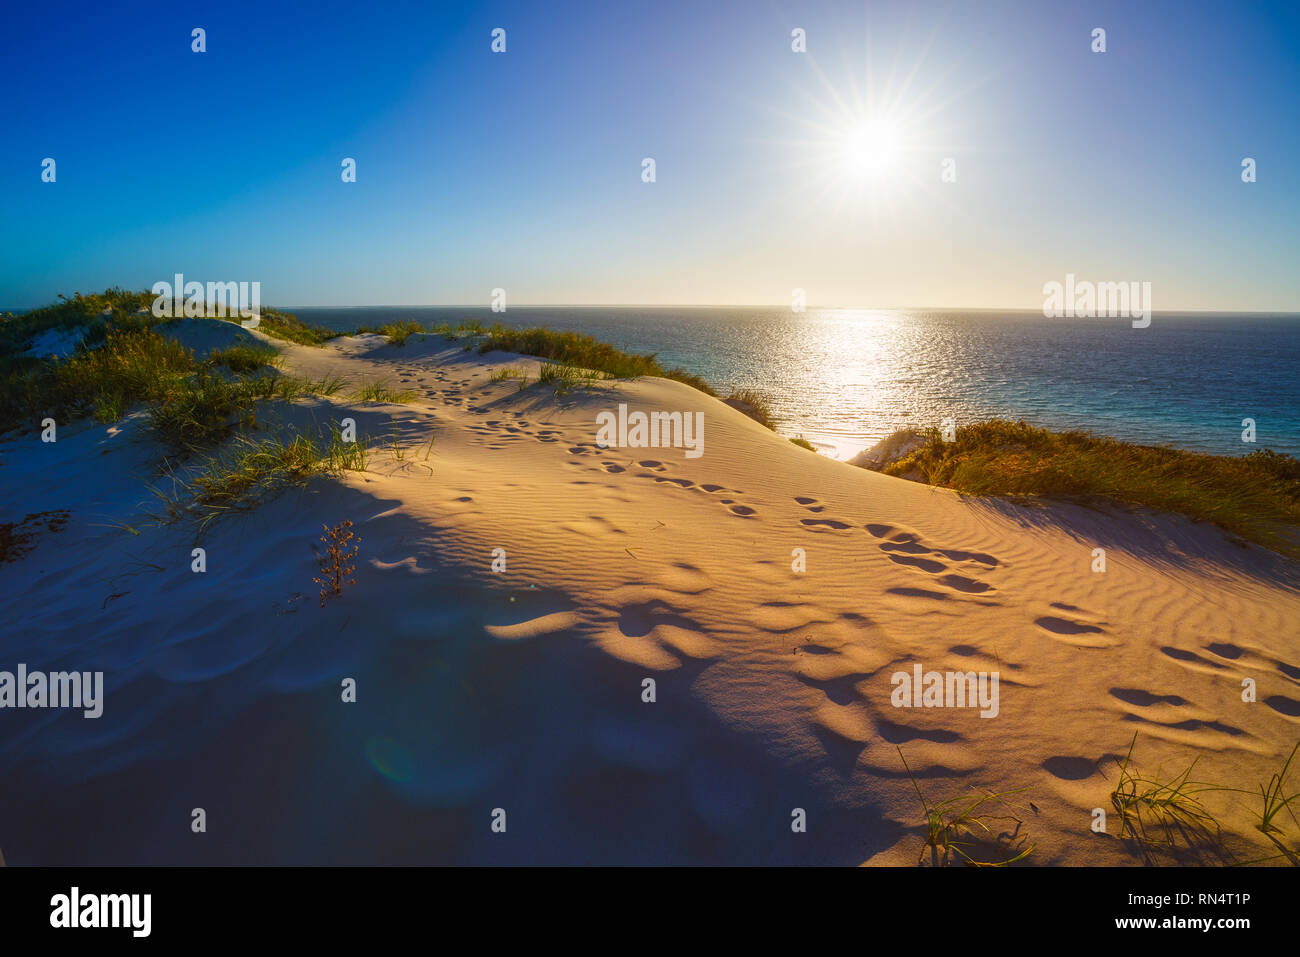 sand dunes in the sunset, bills bay, coral bay, coral coast, western australia Stock Photo